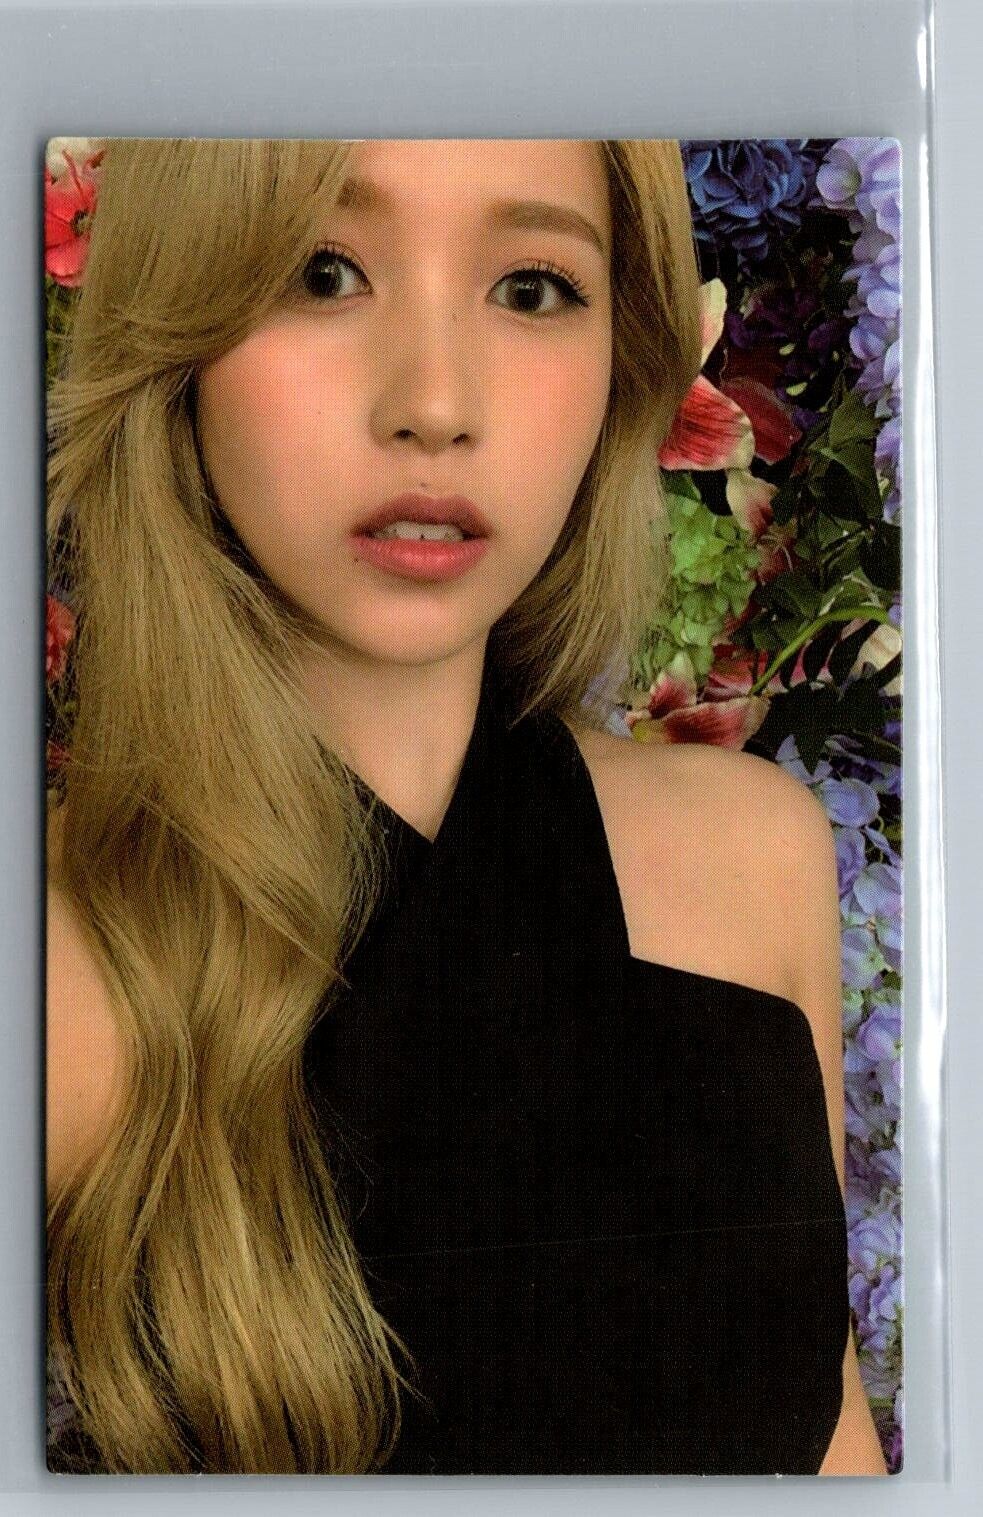 TWICE- MINA EYES WIDE OPEN OFFICIAL ALBUM PHOTOCARD (US SELLER)